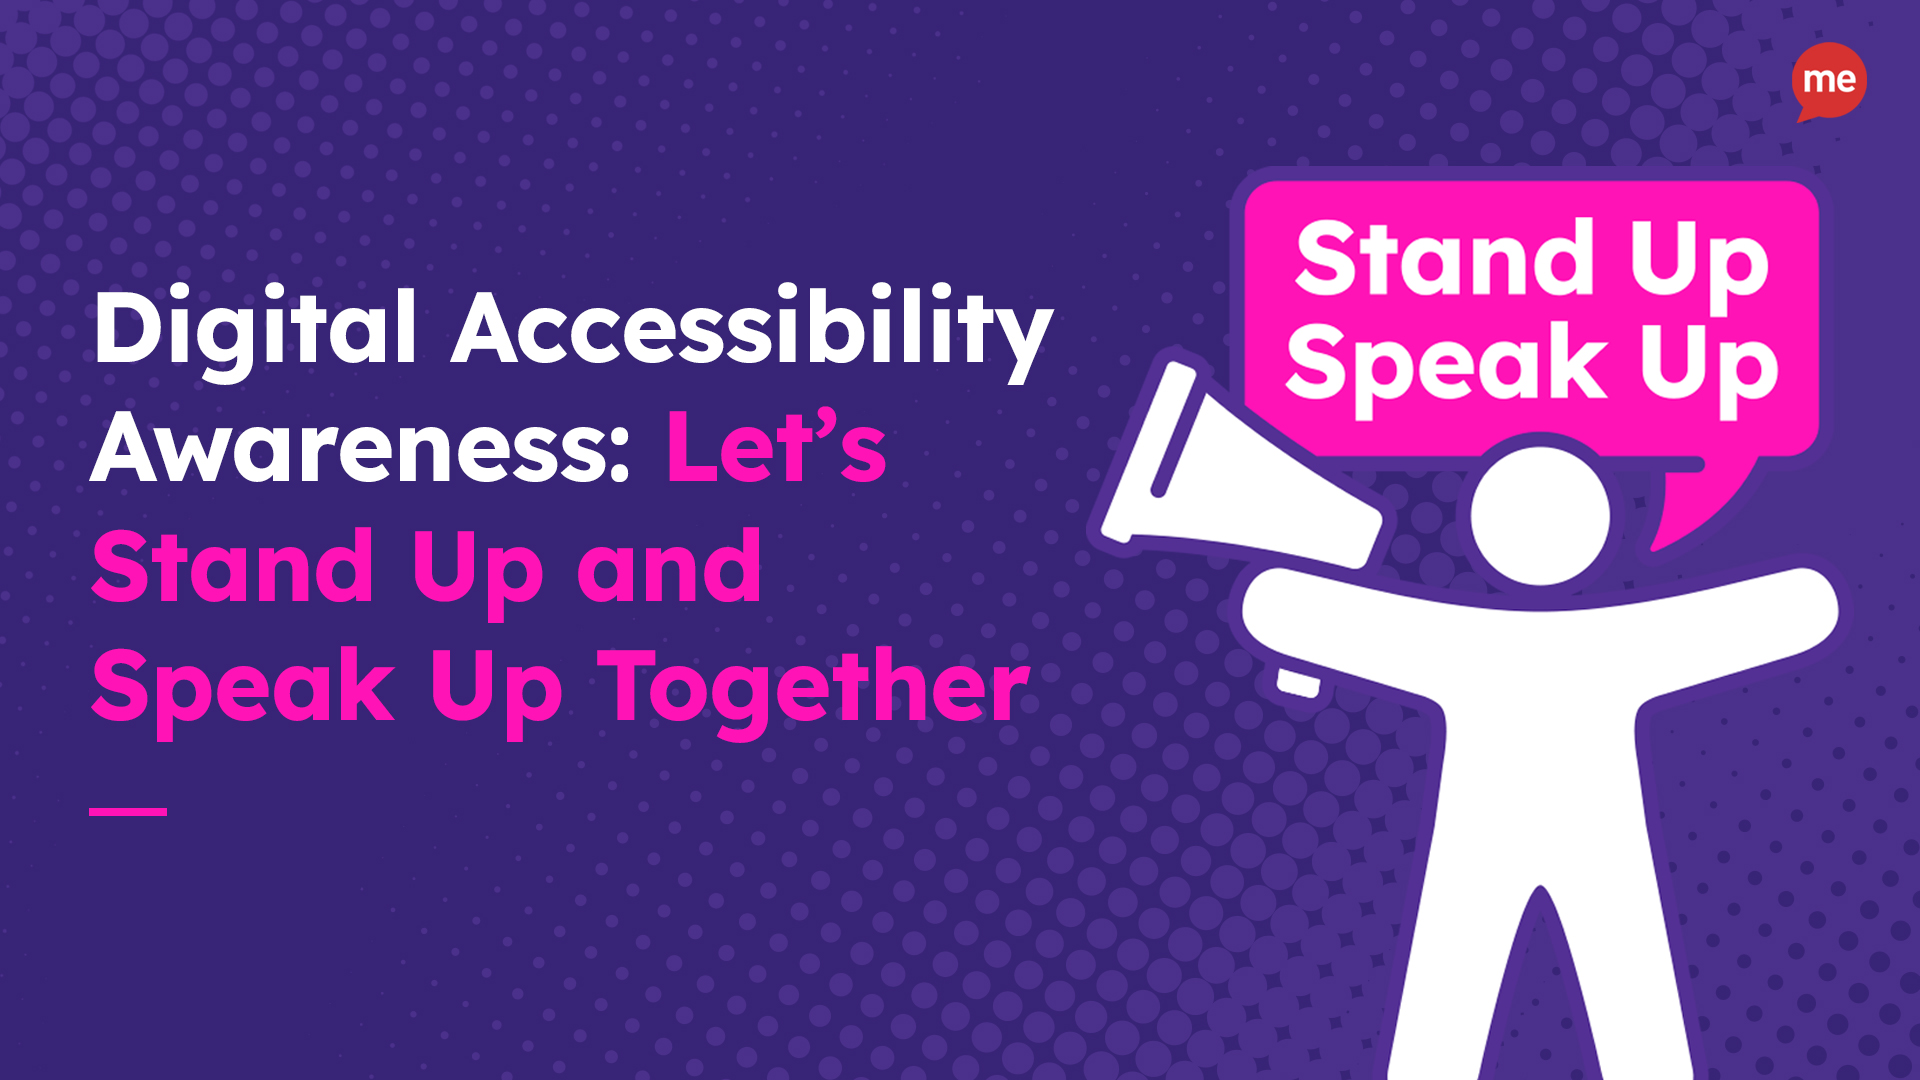 Digital Accessibility Awareness: Let's Stand Up and Speak Up Together